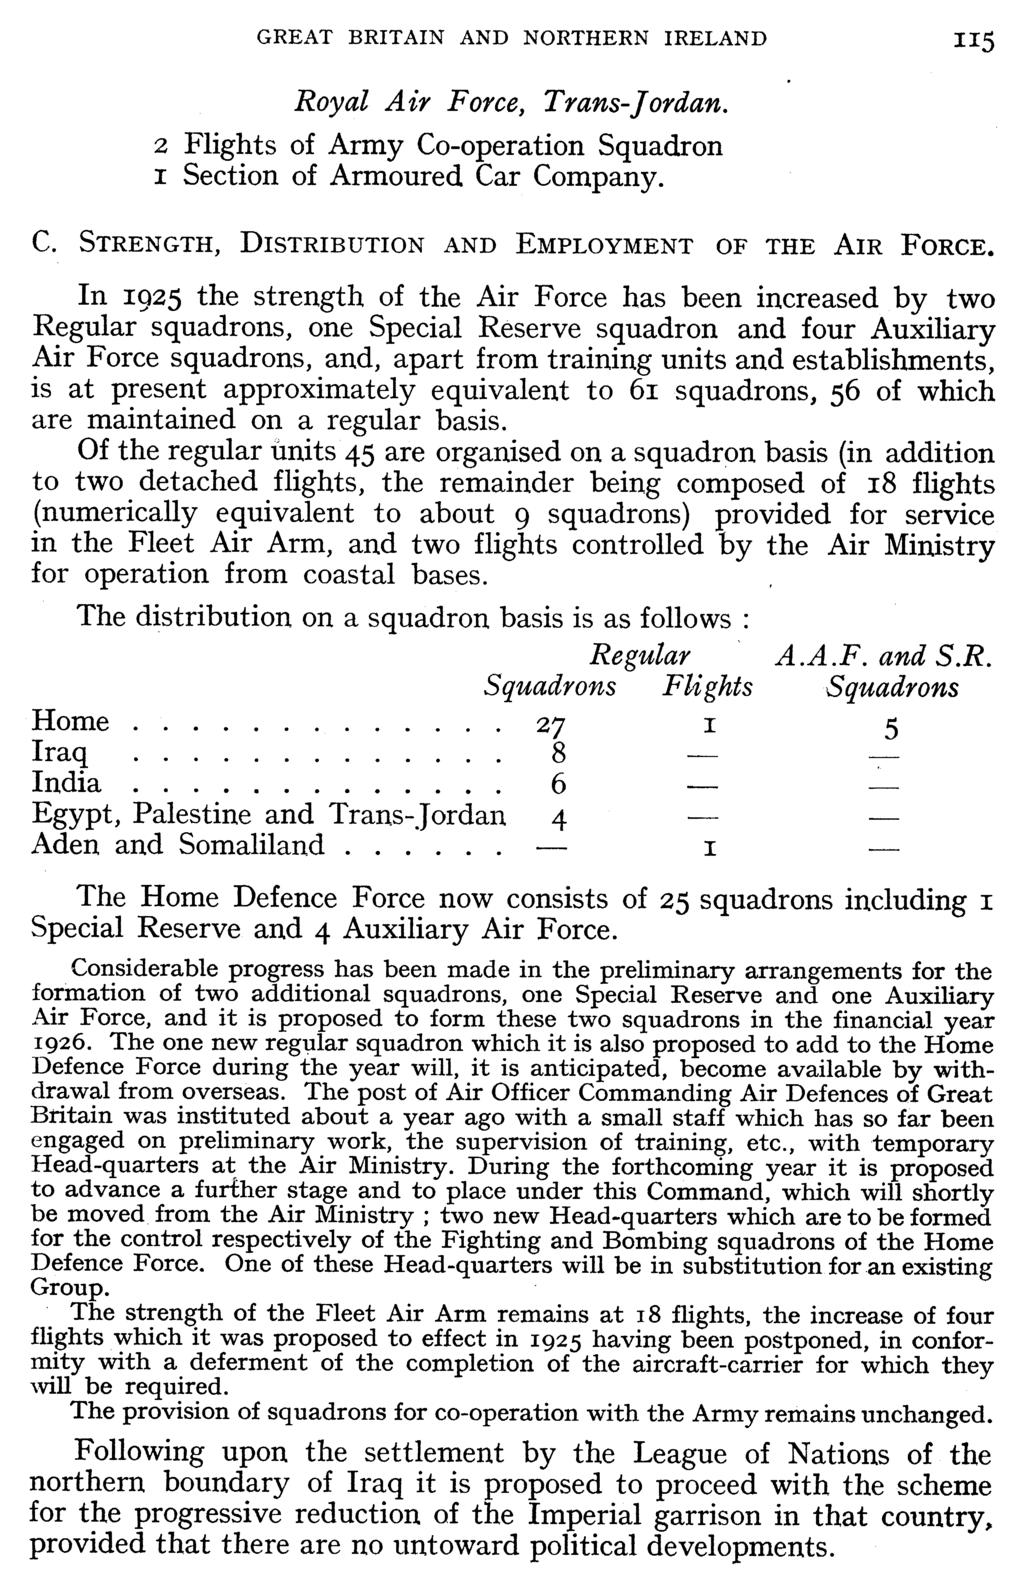 GREAT BRITAIN AND NORTHERN IRELAND 115 Royal Air Force, Trans-Jordan. 2 Flights of Army Co-operation Squadron I Section of Armoured Car Company. C. STRENGTH, DISTRIBUTION AND EMPLOYMENT OF THE AIR FORCE.